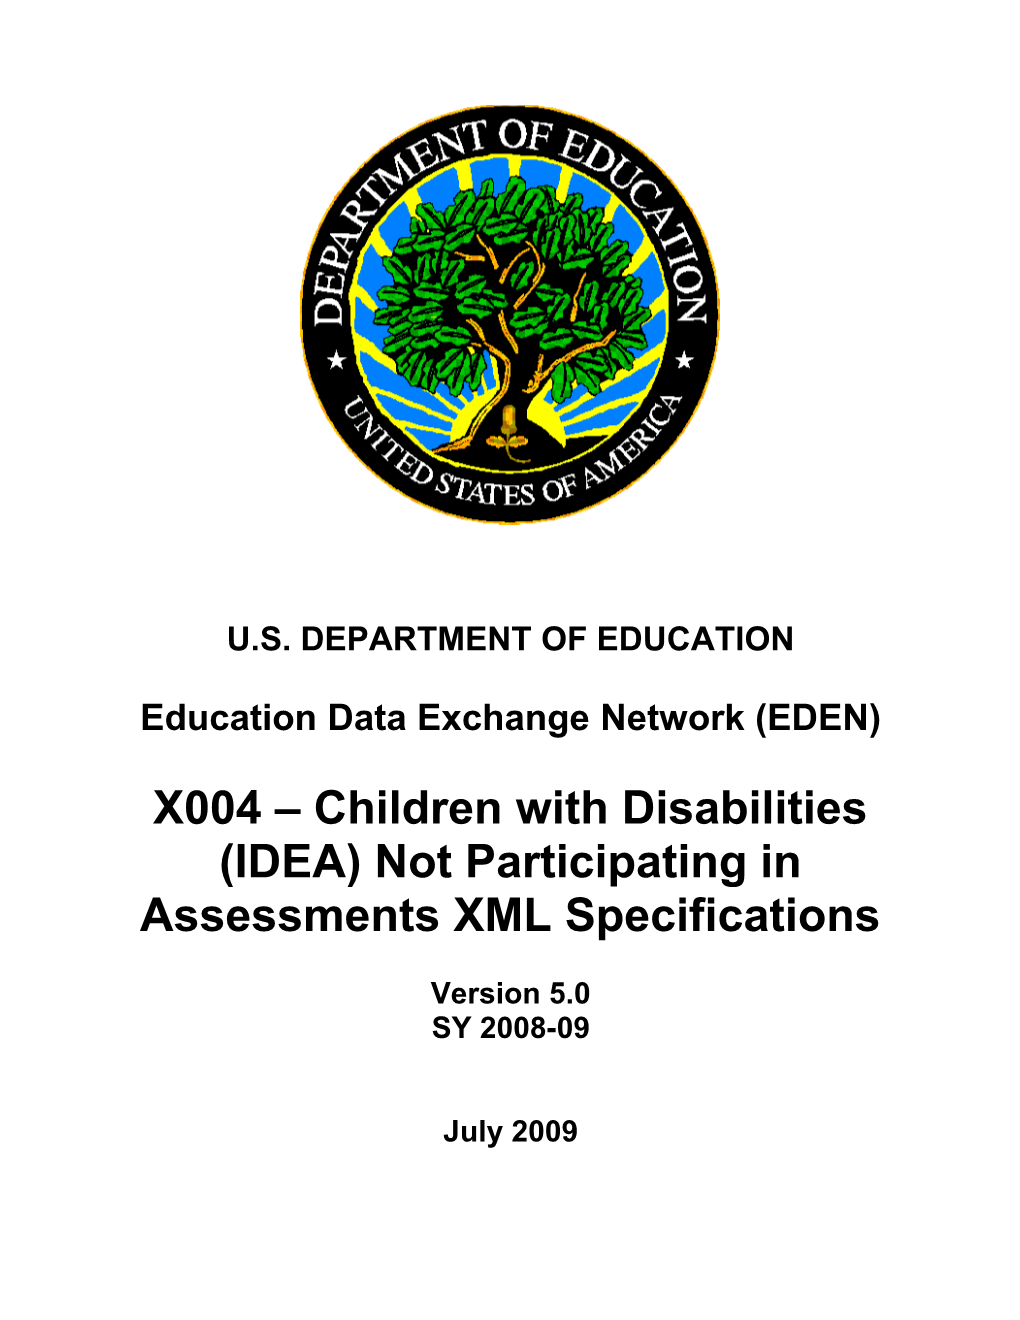 X004 Children with Disabilities (IDEA) Not Participating in Assessments XML Specifications